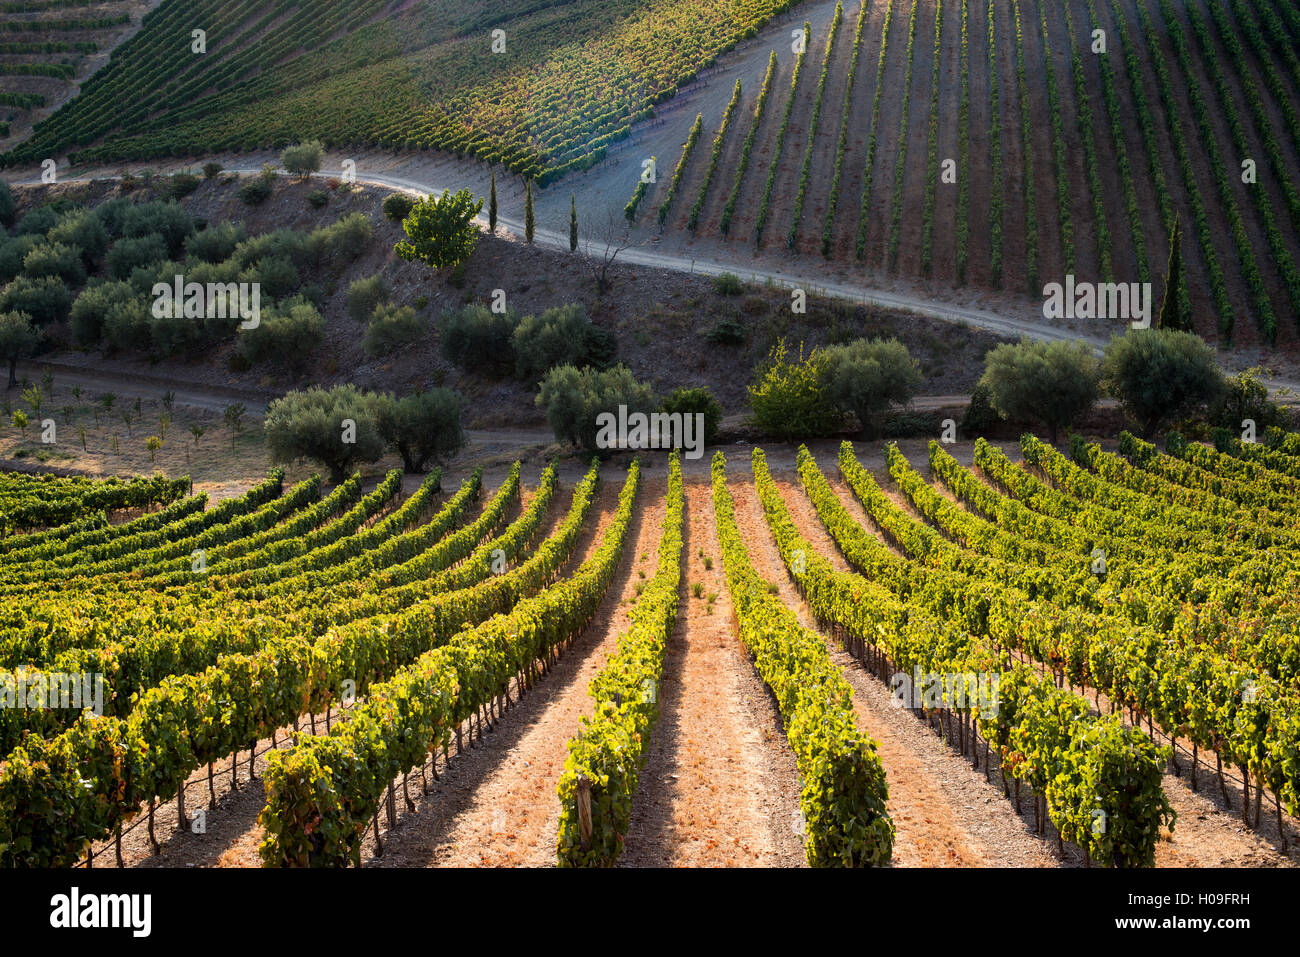 Rows of grape vines ripening in the sun at a vineyard in the Alto Douro region, Portugal, Europe Stock Photo